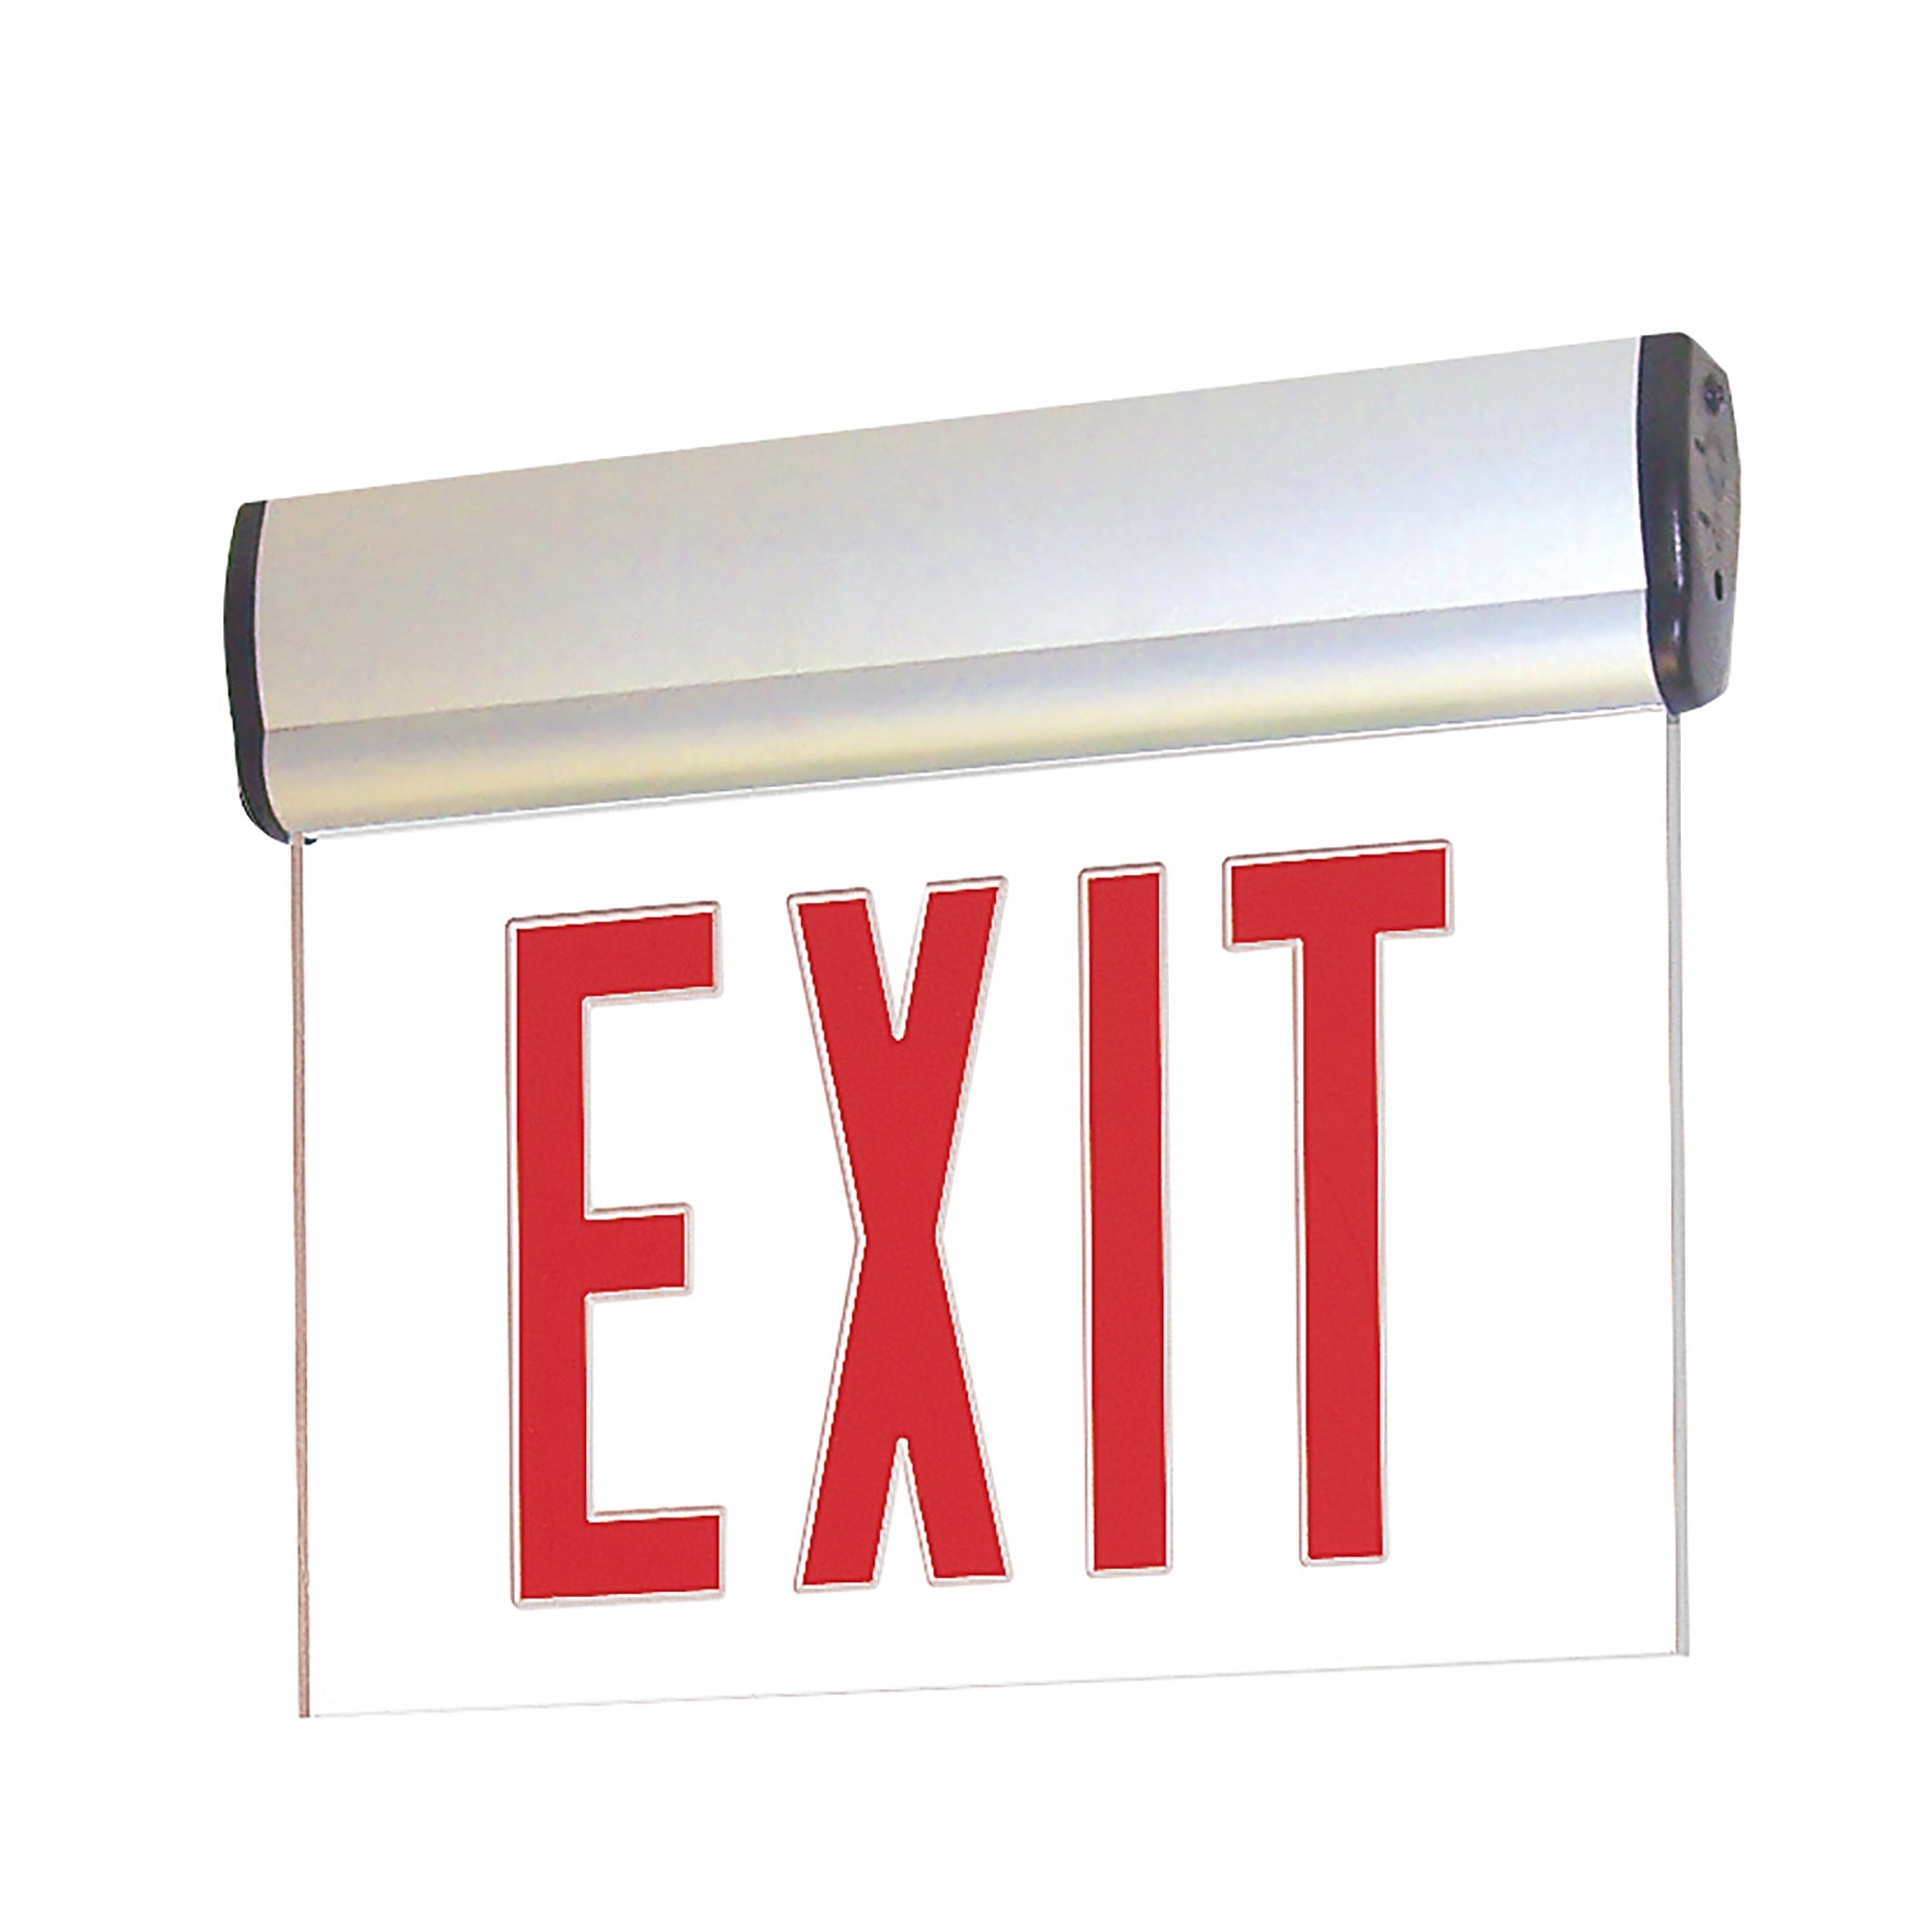 Nora Lighting NX-811-LEDRCA - Exit / Emergency - Surface Adjustable LED Edge-Lit Exit Sign, 2 Circuit, 6 Inch Red Letters, Single Face / Clear Acrylic, Aluminum Housing